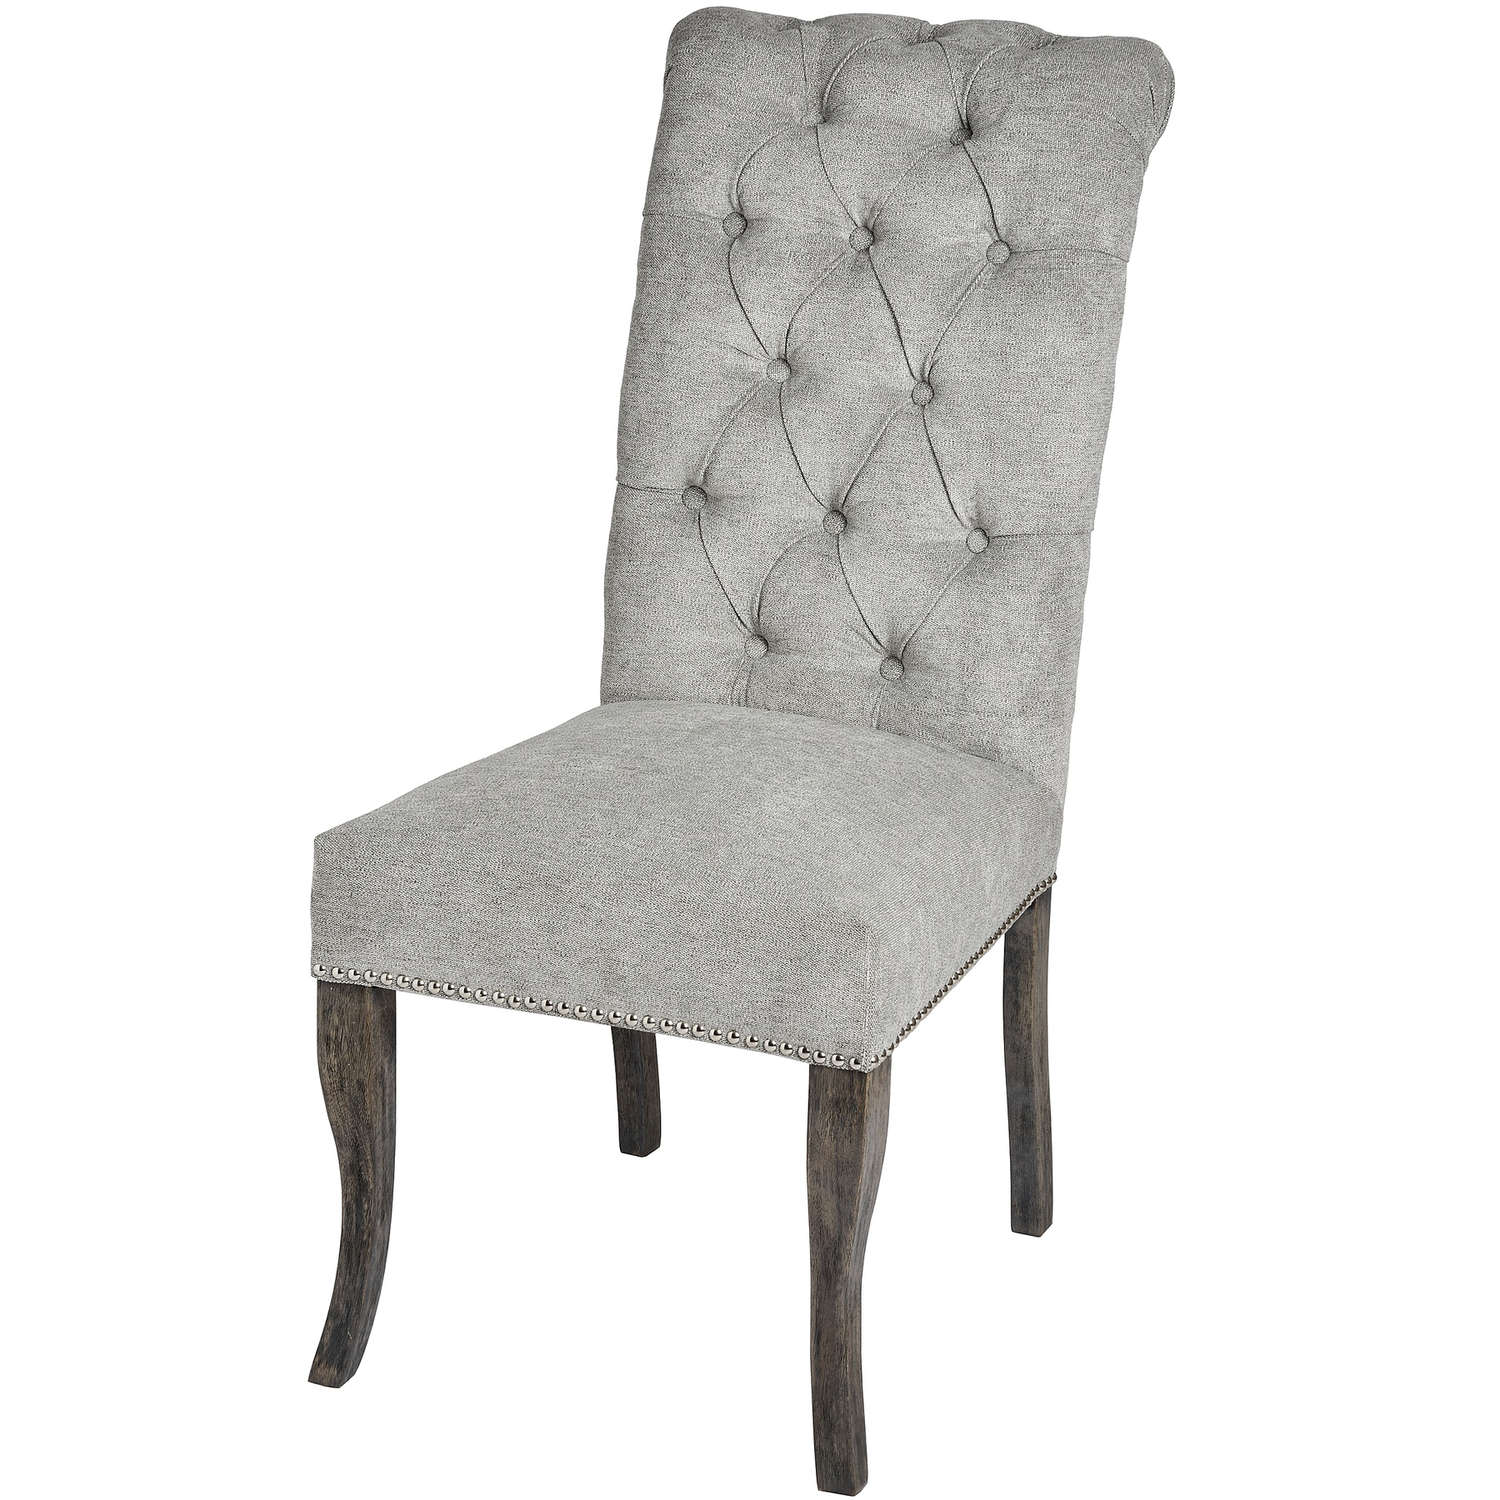 Silver Roll Top Dining Chair With Ring Pull - Image 1